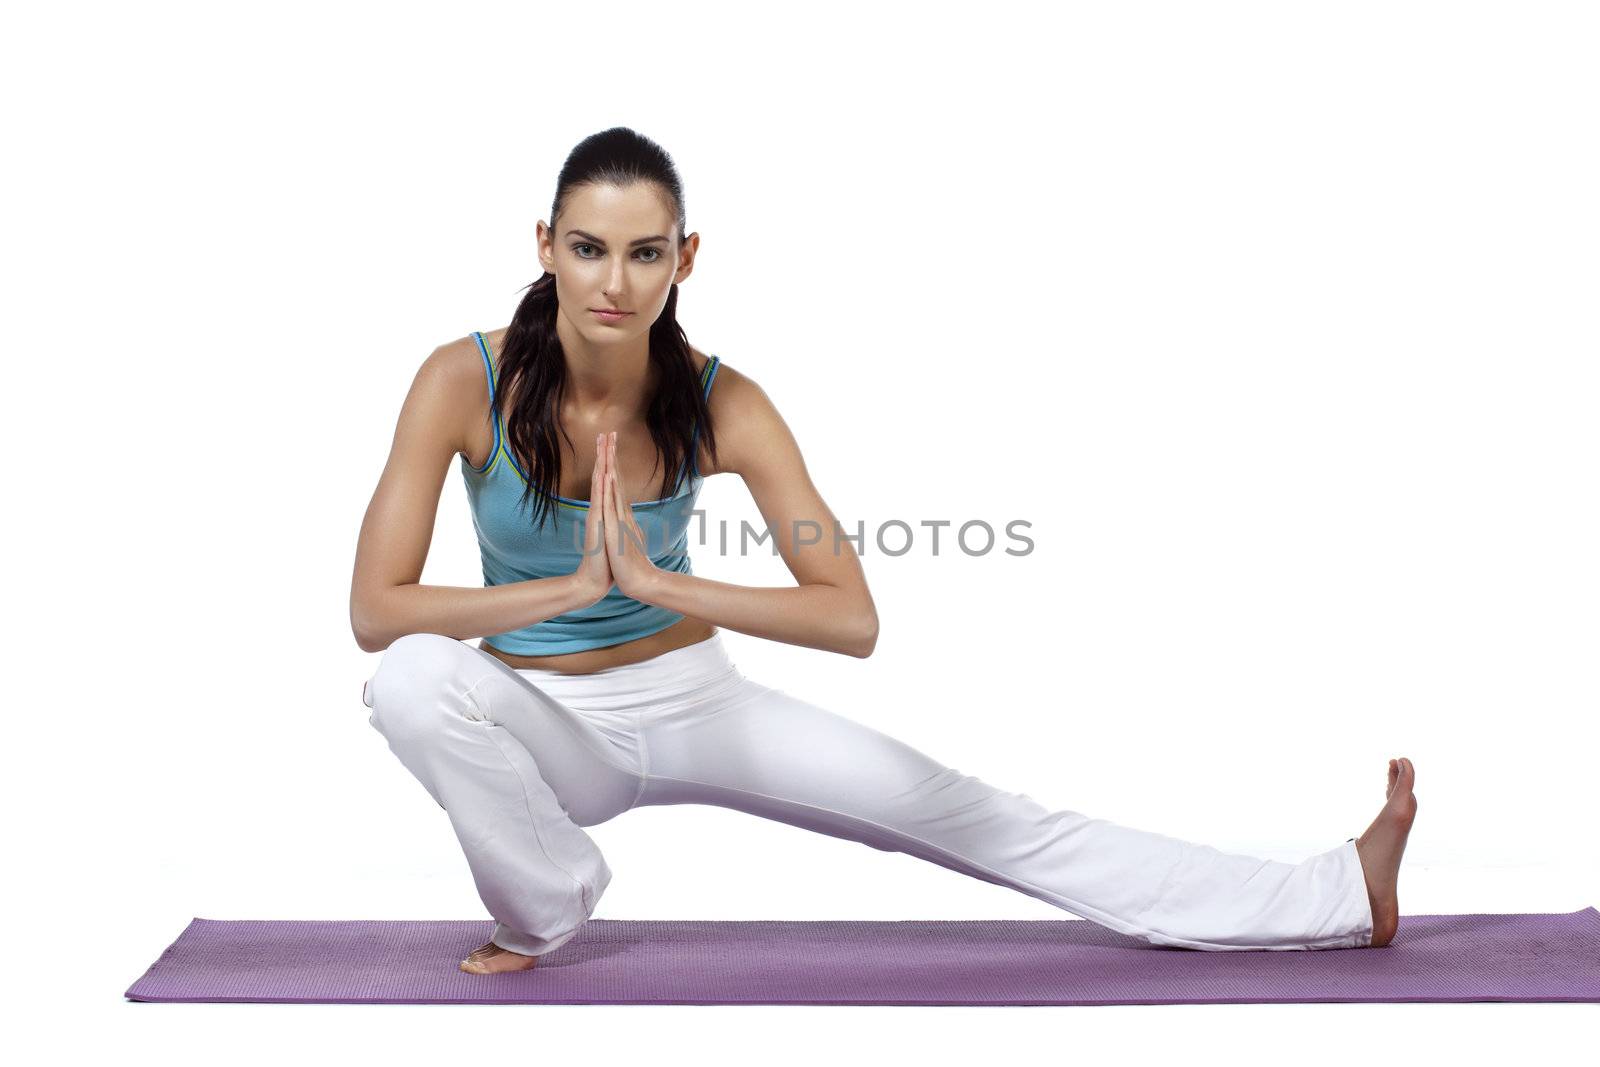 Image of  a healthy woman with her left leg stretch on the mat and facing on the camera